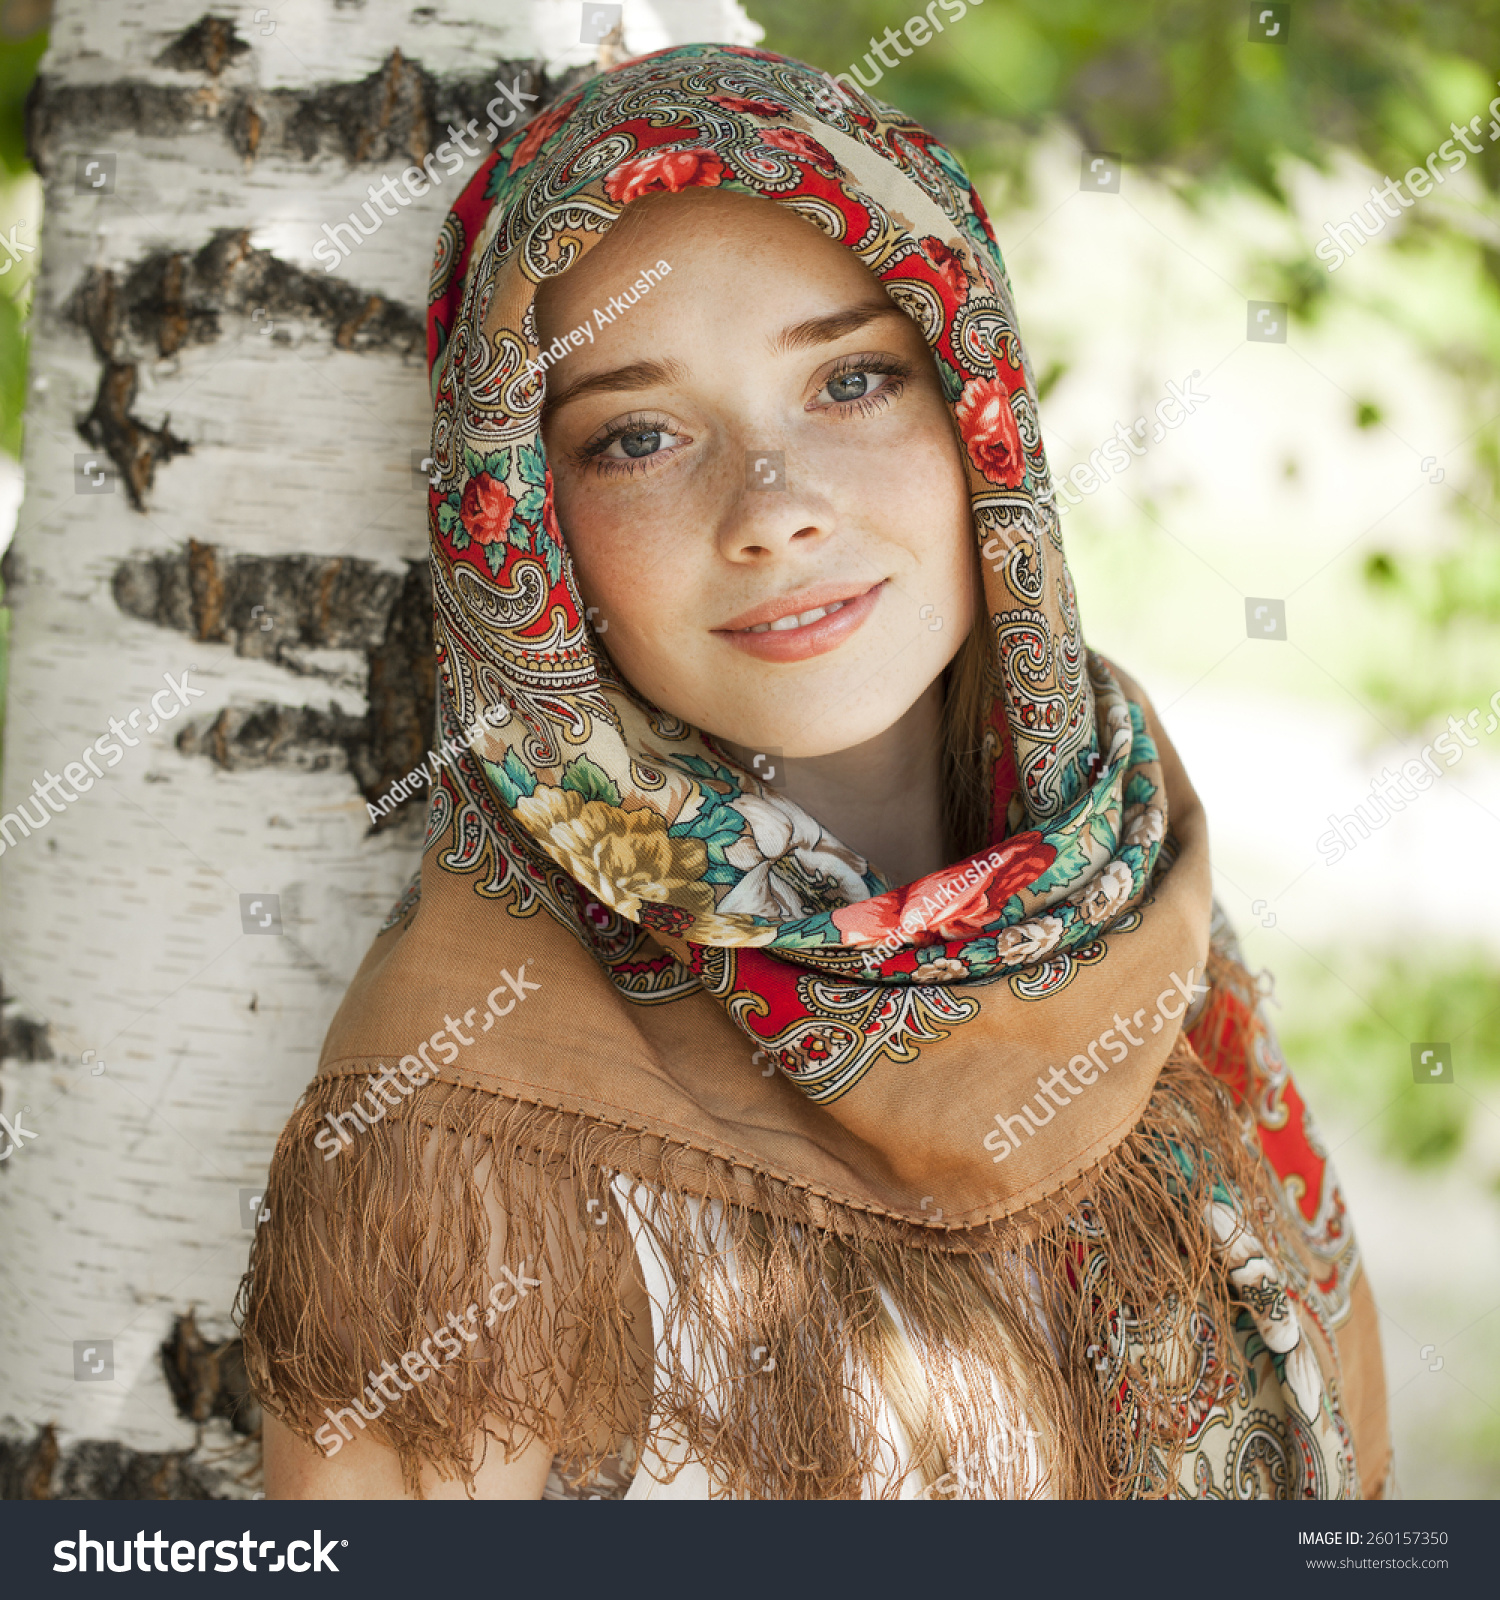 https://image.shutterstock.com/z/stock-photo-russian-beauty-woman-in-the-national-patterned-scarf-260157350.jpg